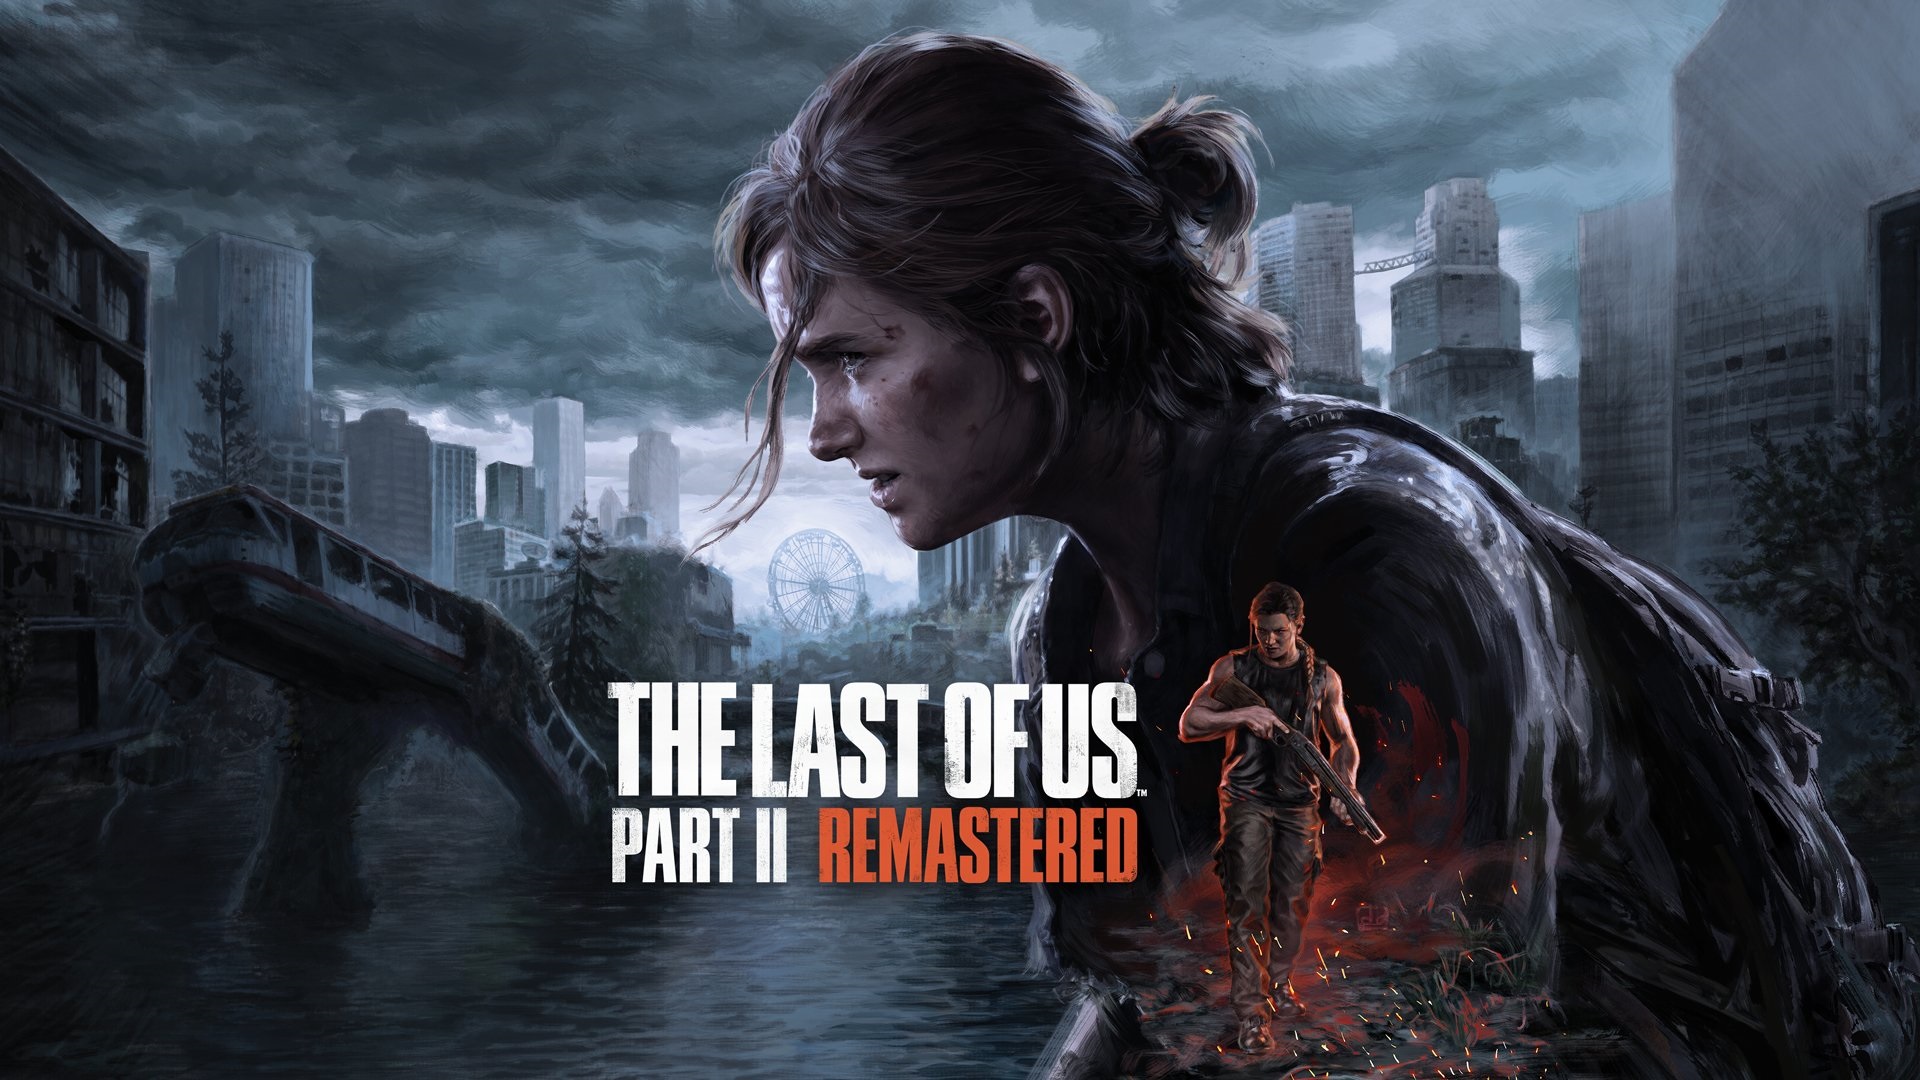 The Last of Us Part 2 Remastered Comes To PS5 January 19